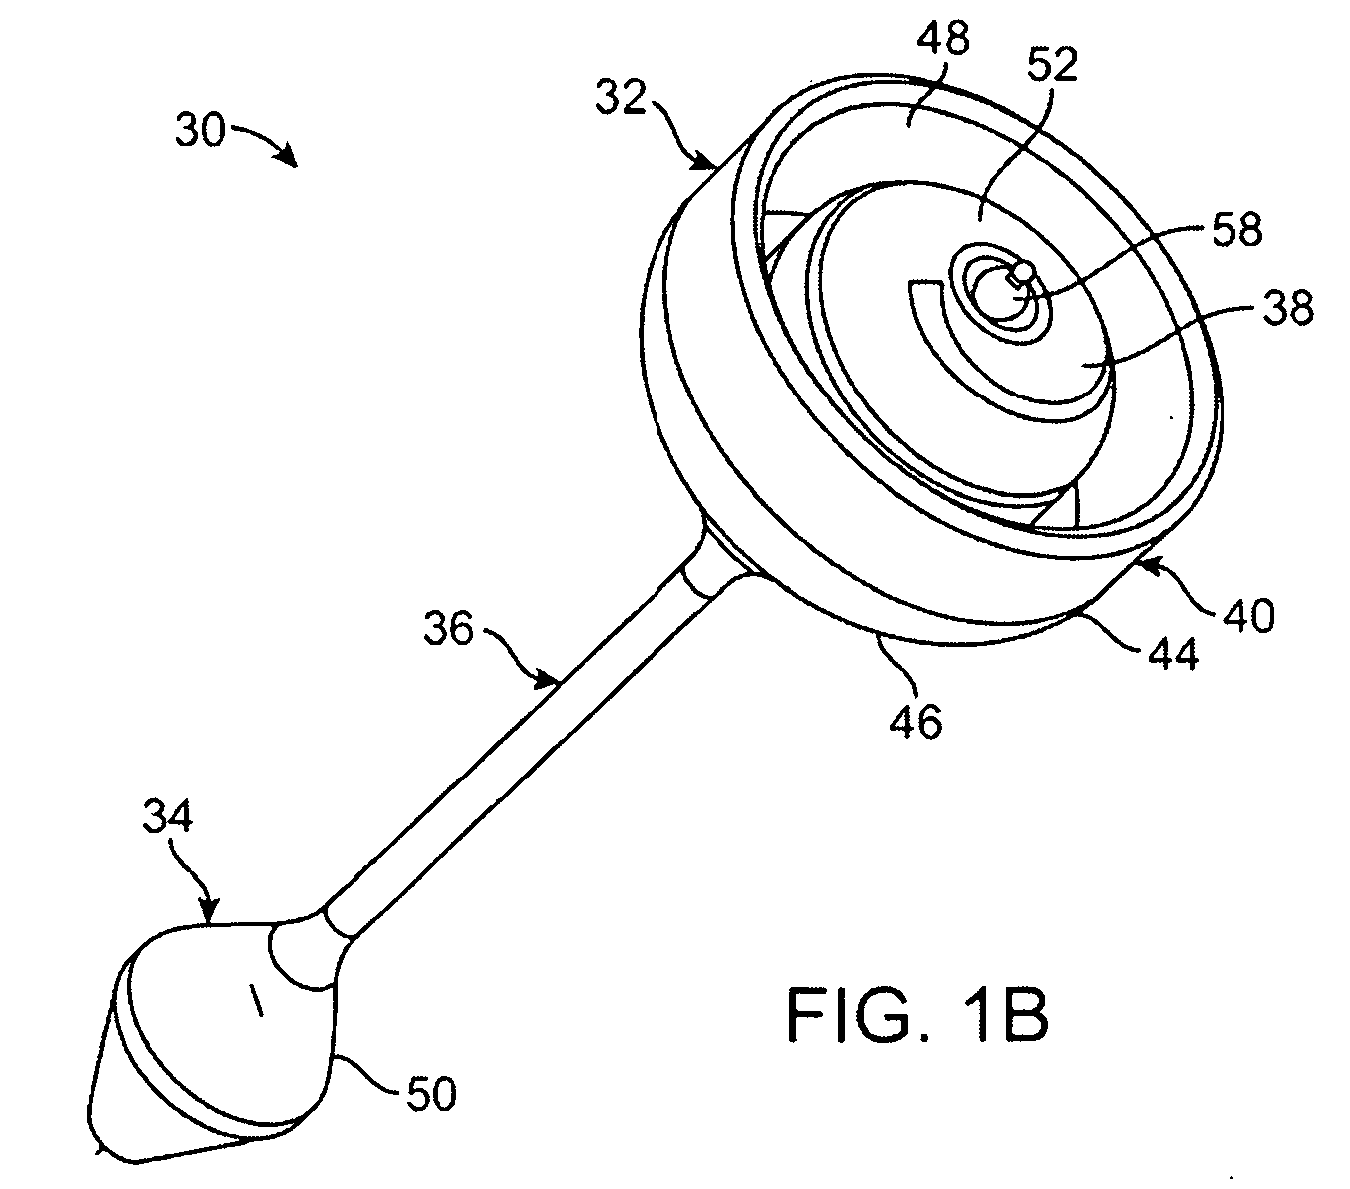 Device for intermittently obstructing a gastric opening and method of use